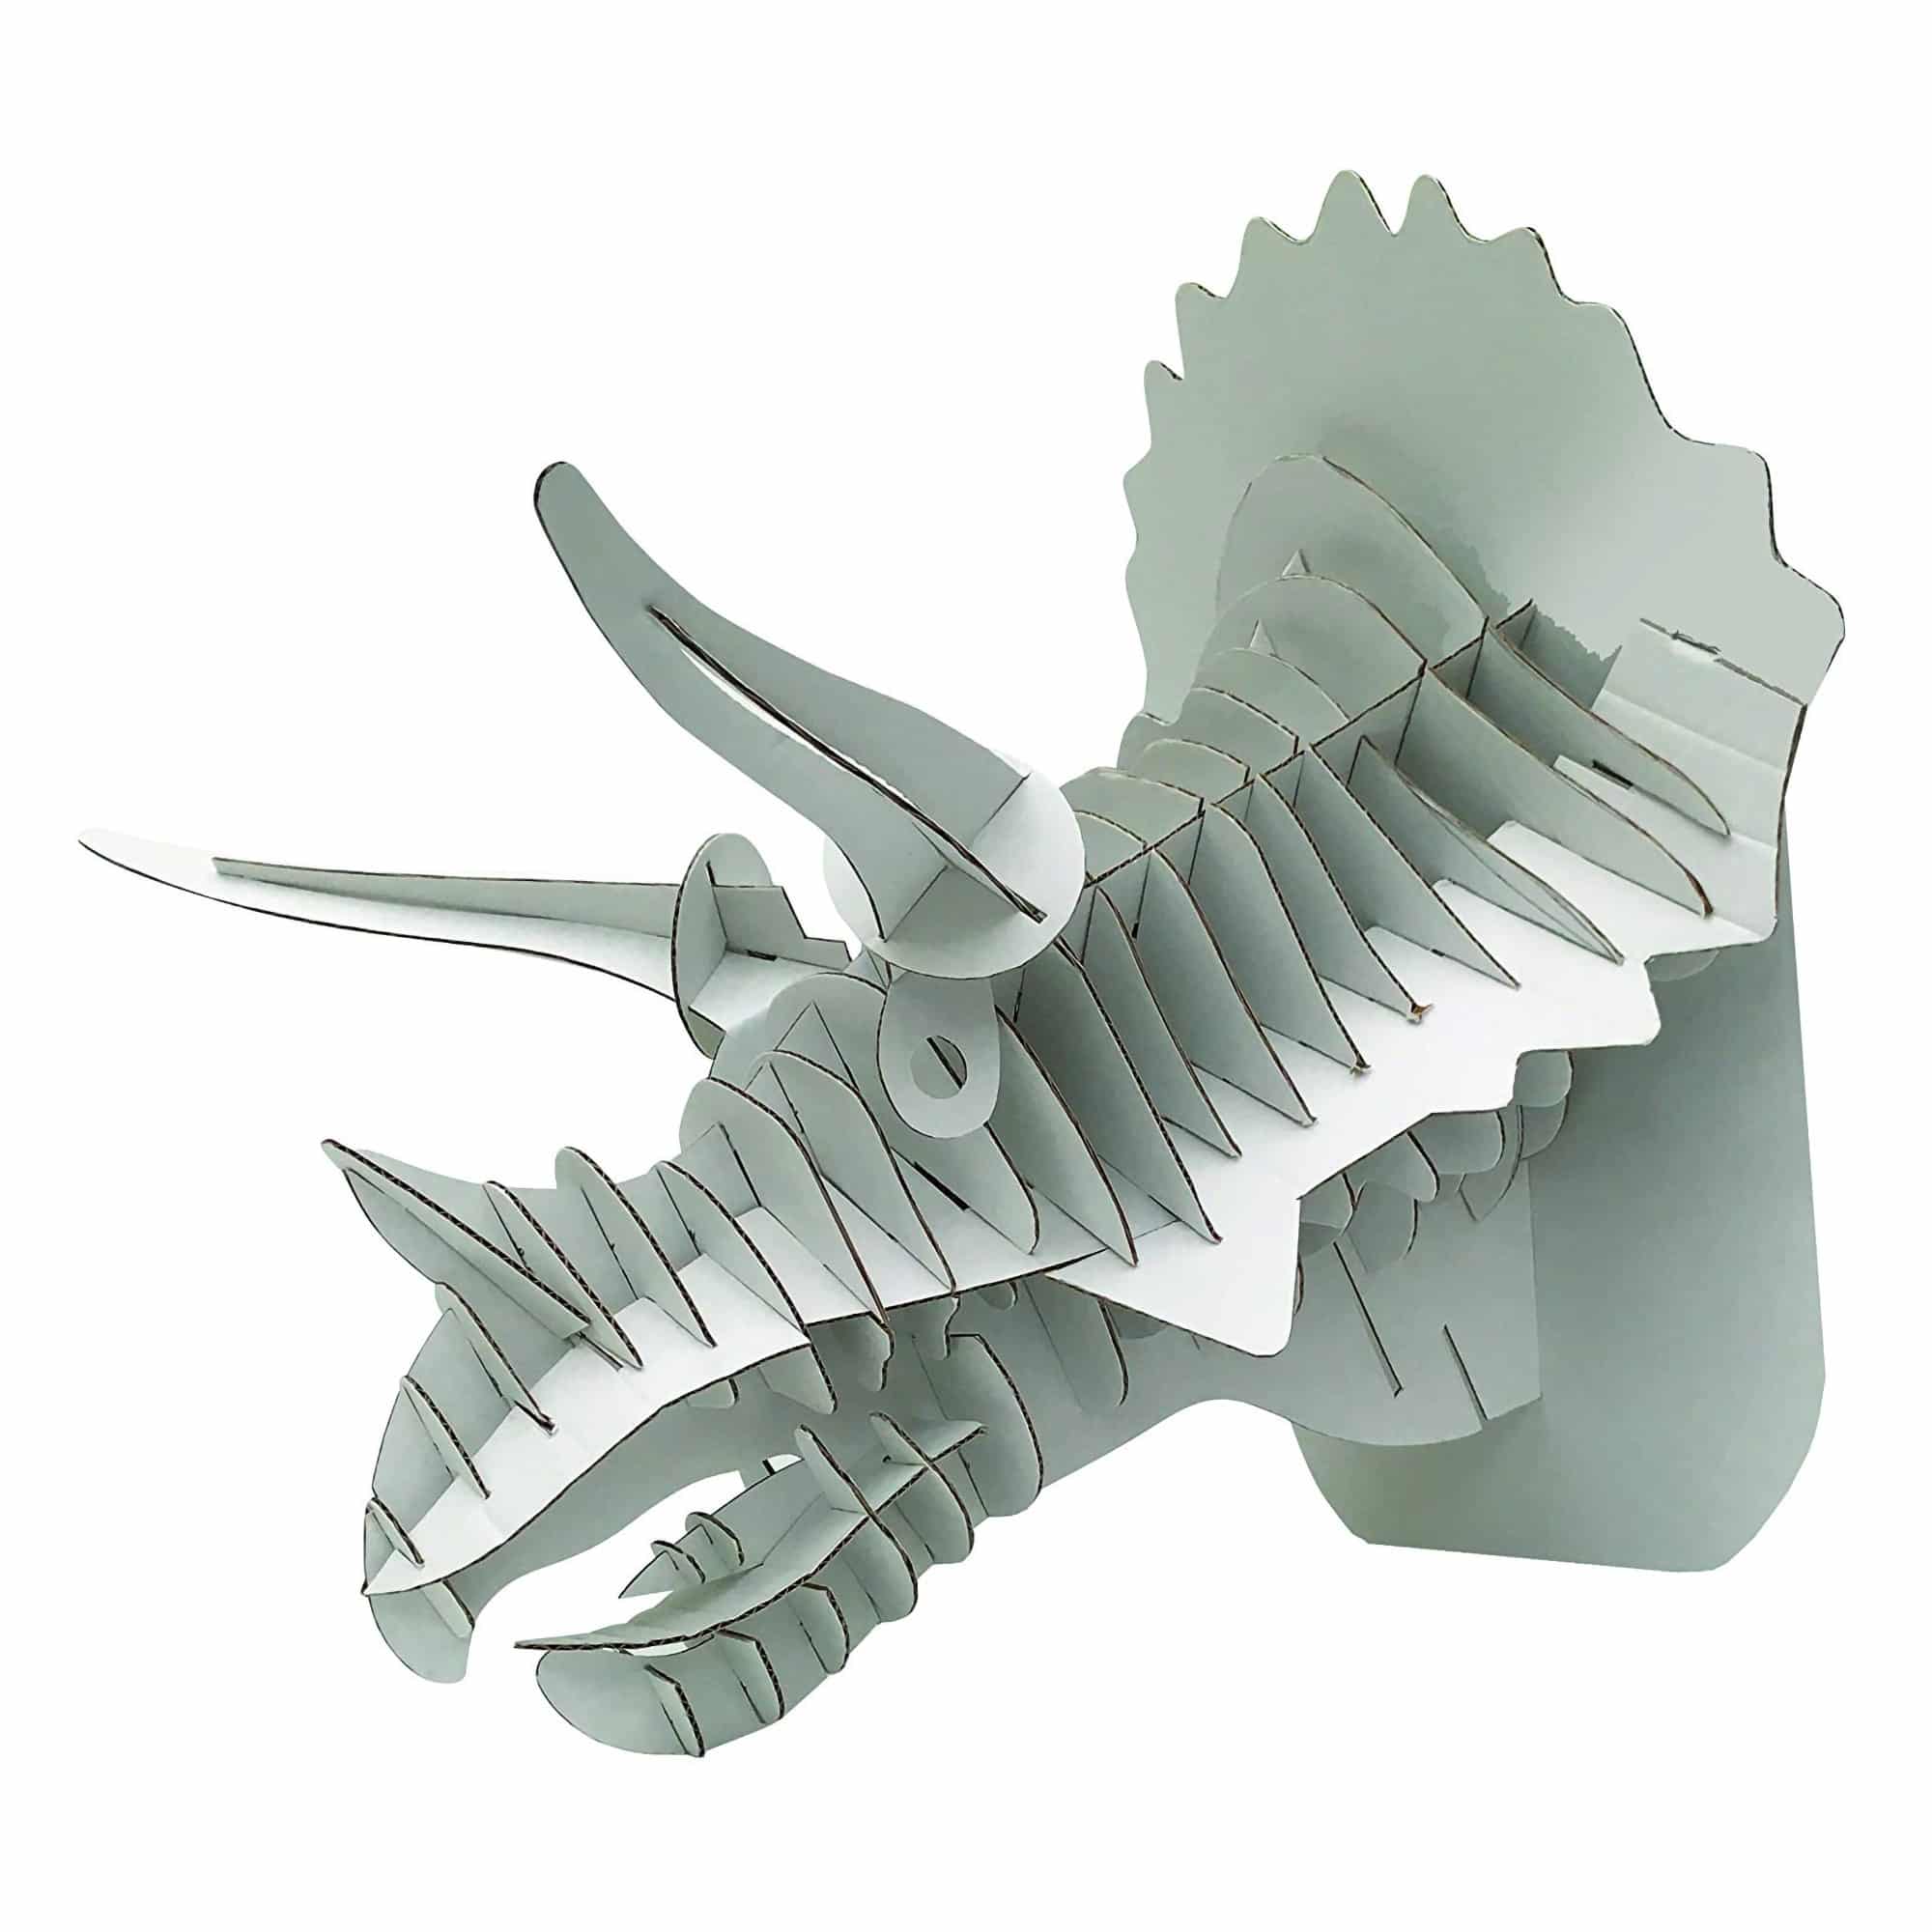 Create a 3D Triceratops